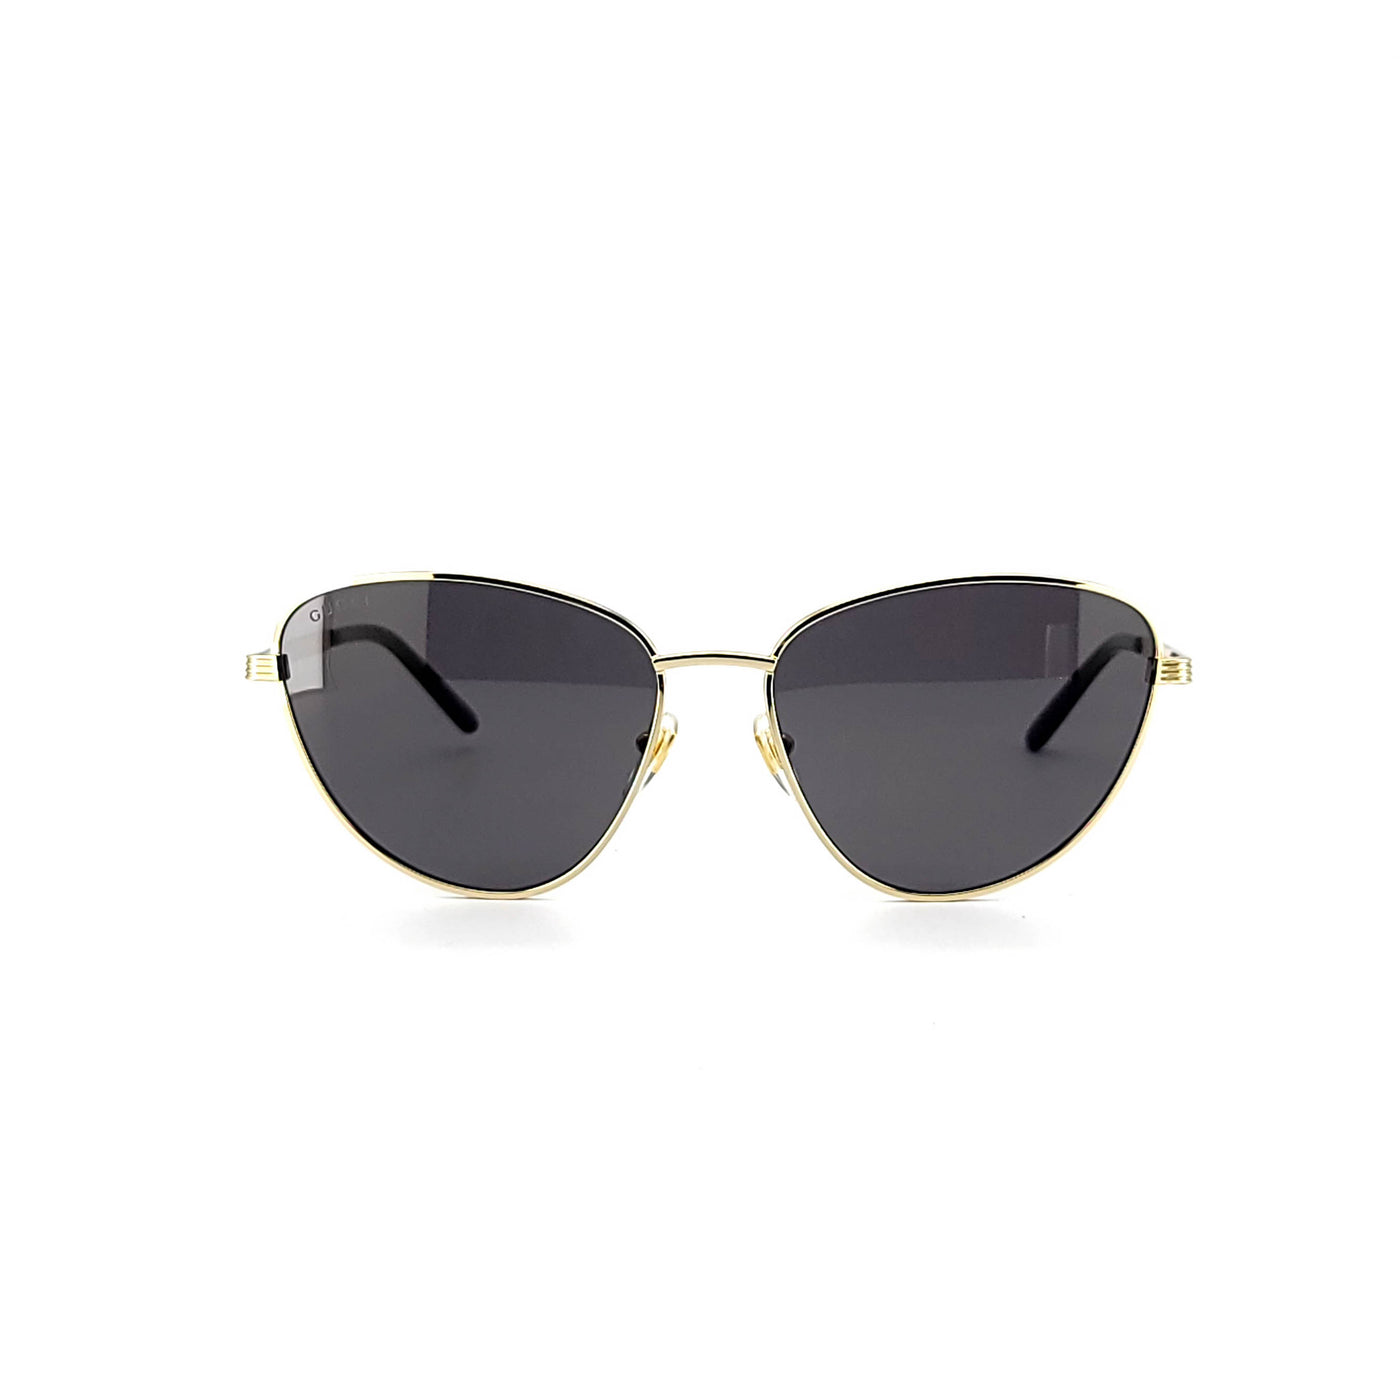 Gucci GG 0803S/001 | Sunglasses - Vision Express Optical Philippines